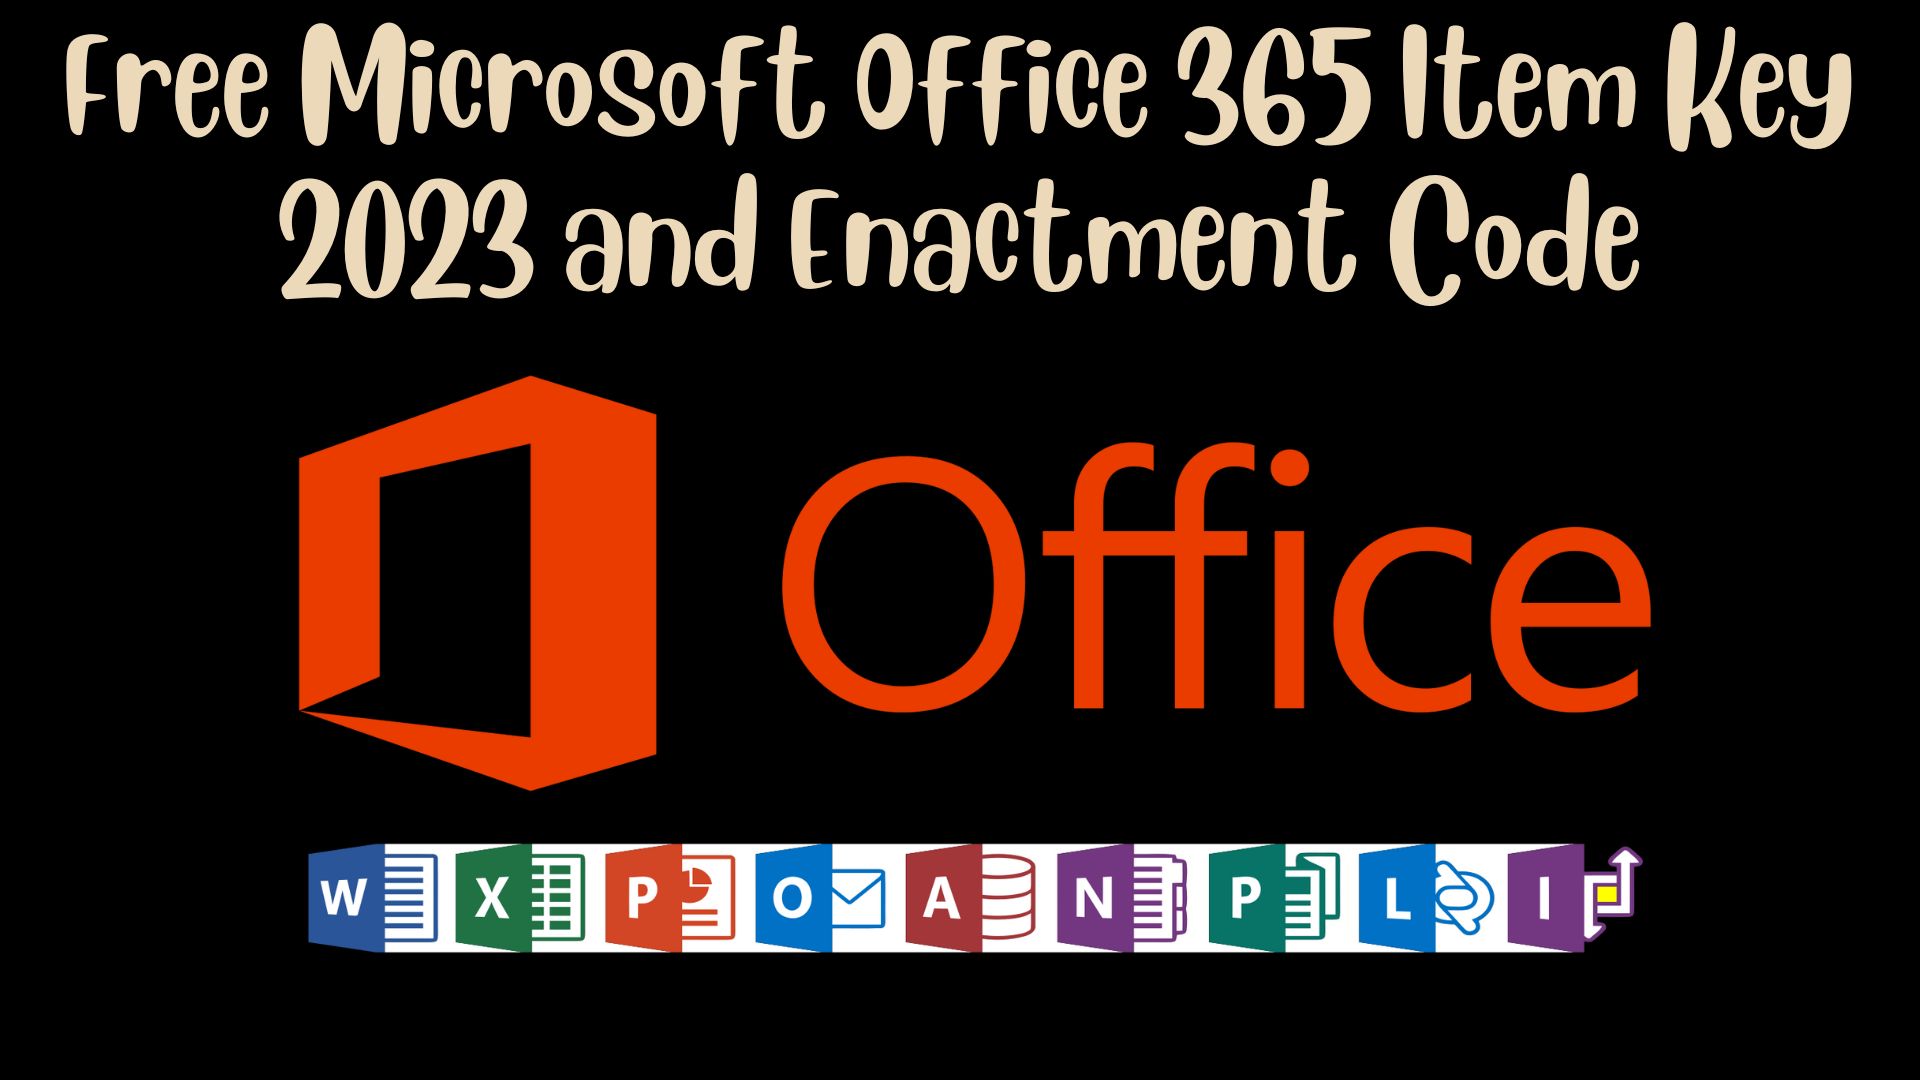 Free Microsoft Office 365 Item Key 2023 And Enactment Code